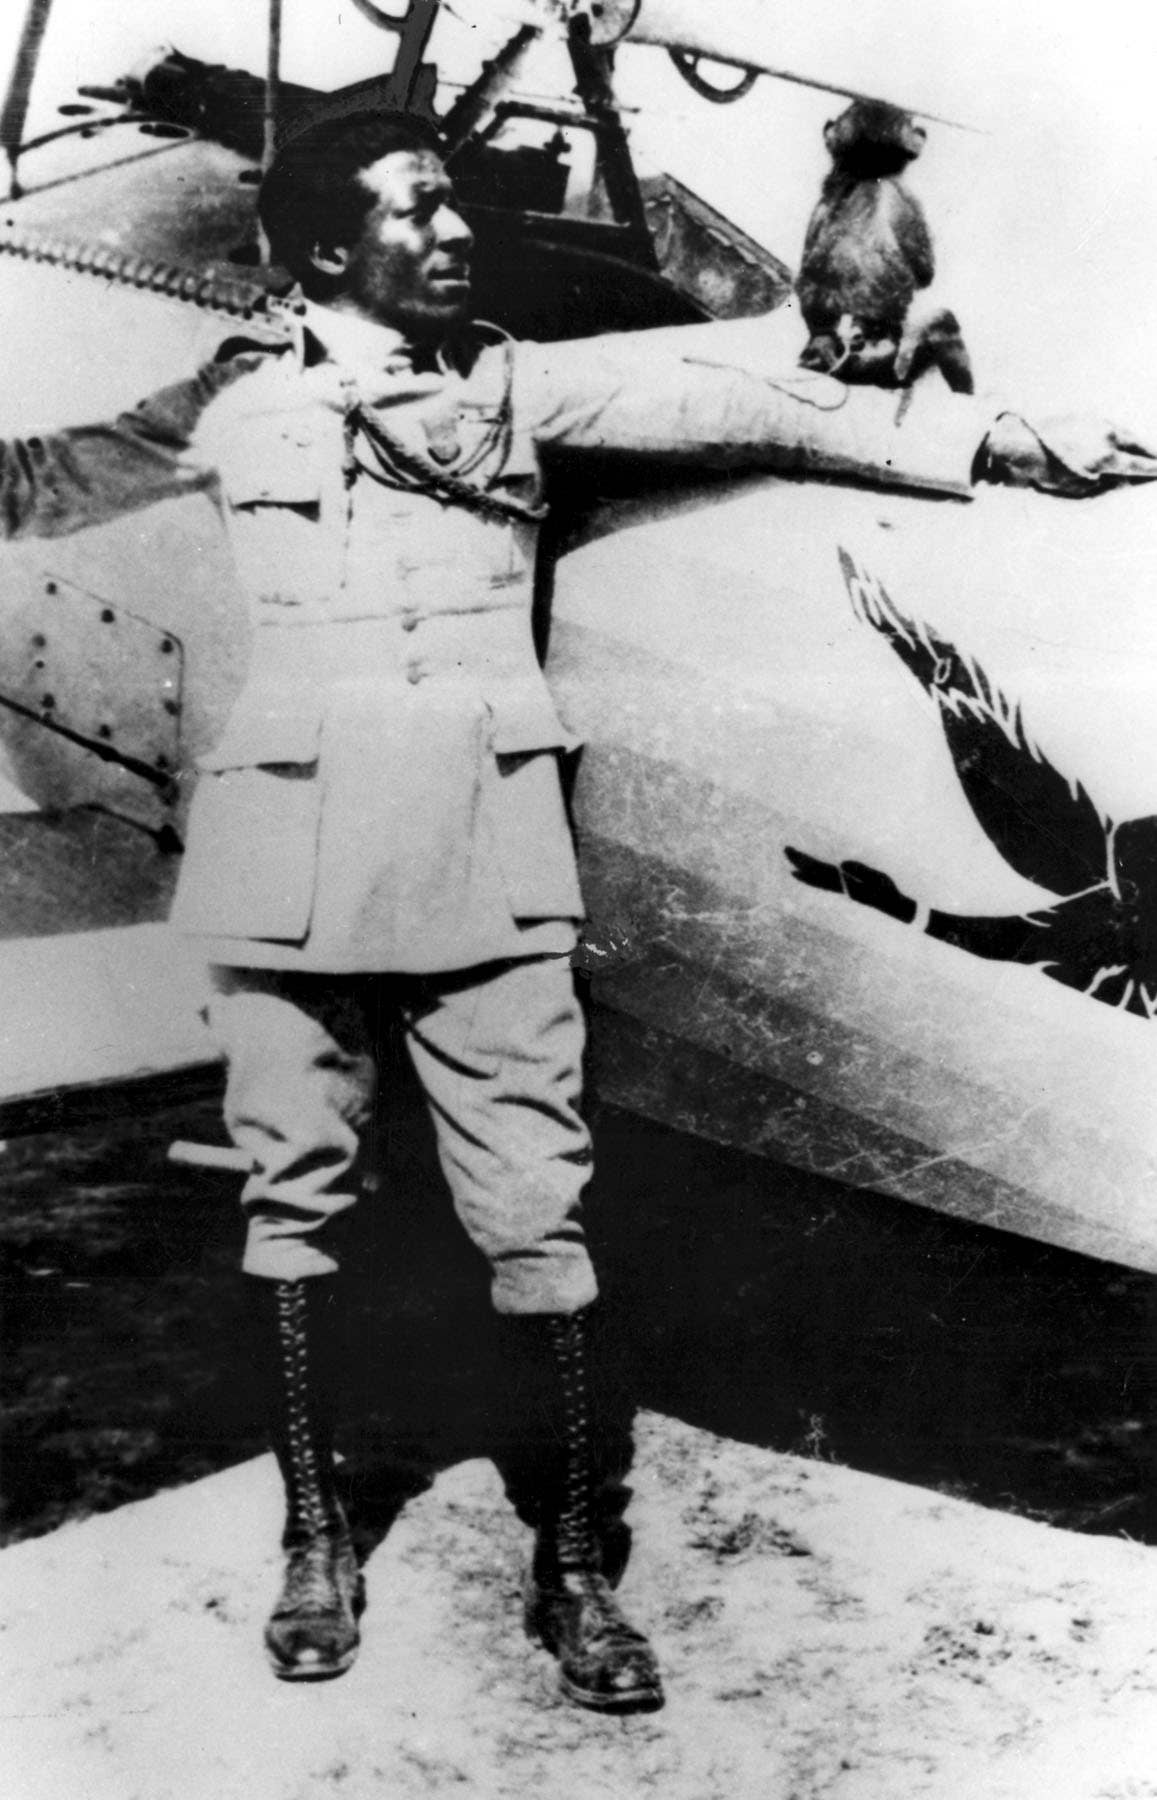 Eugene Jacques Bullard poses with his monkey who sometimes accompanied him on missions. Photo: US Air Force historical photo